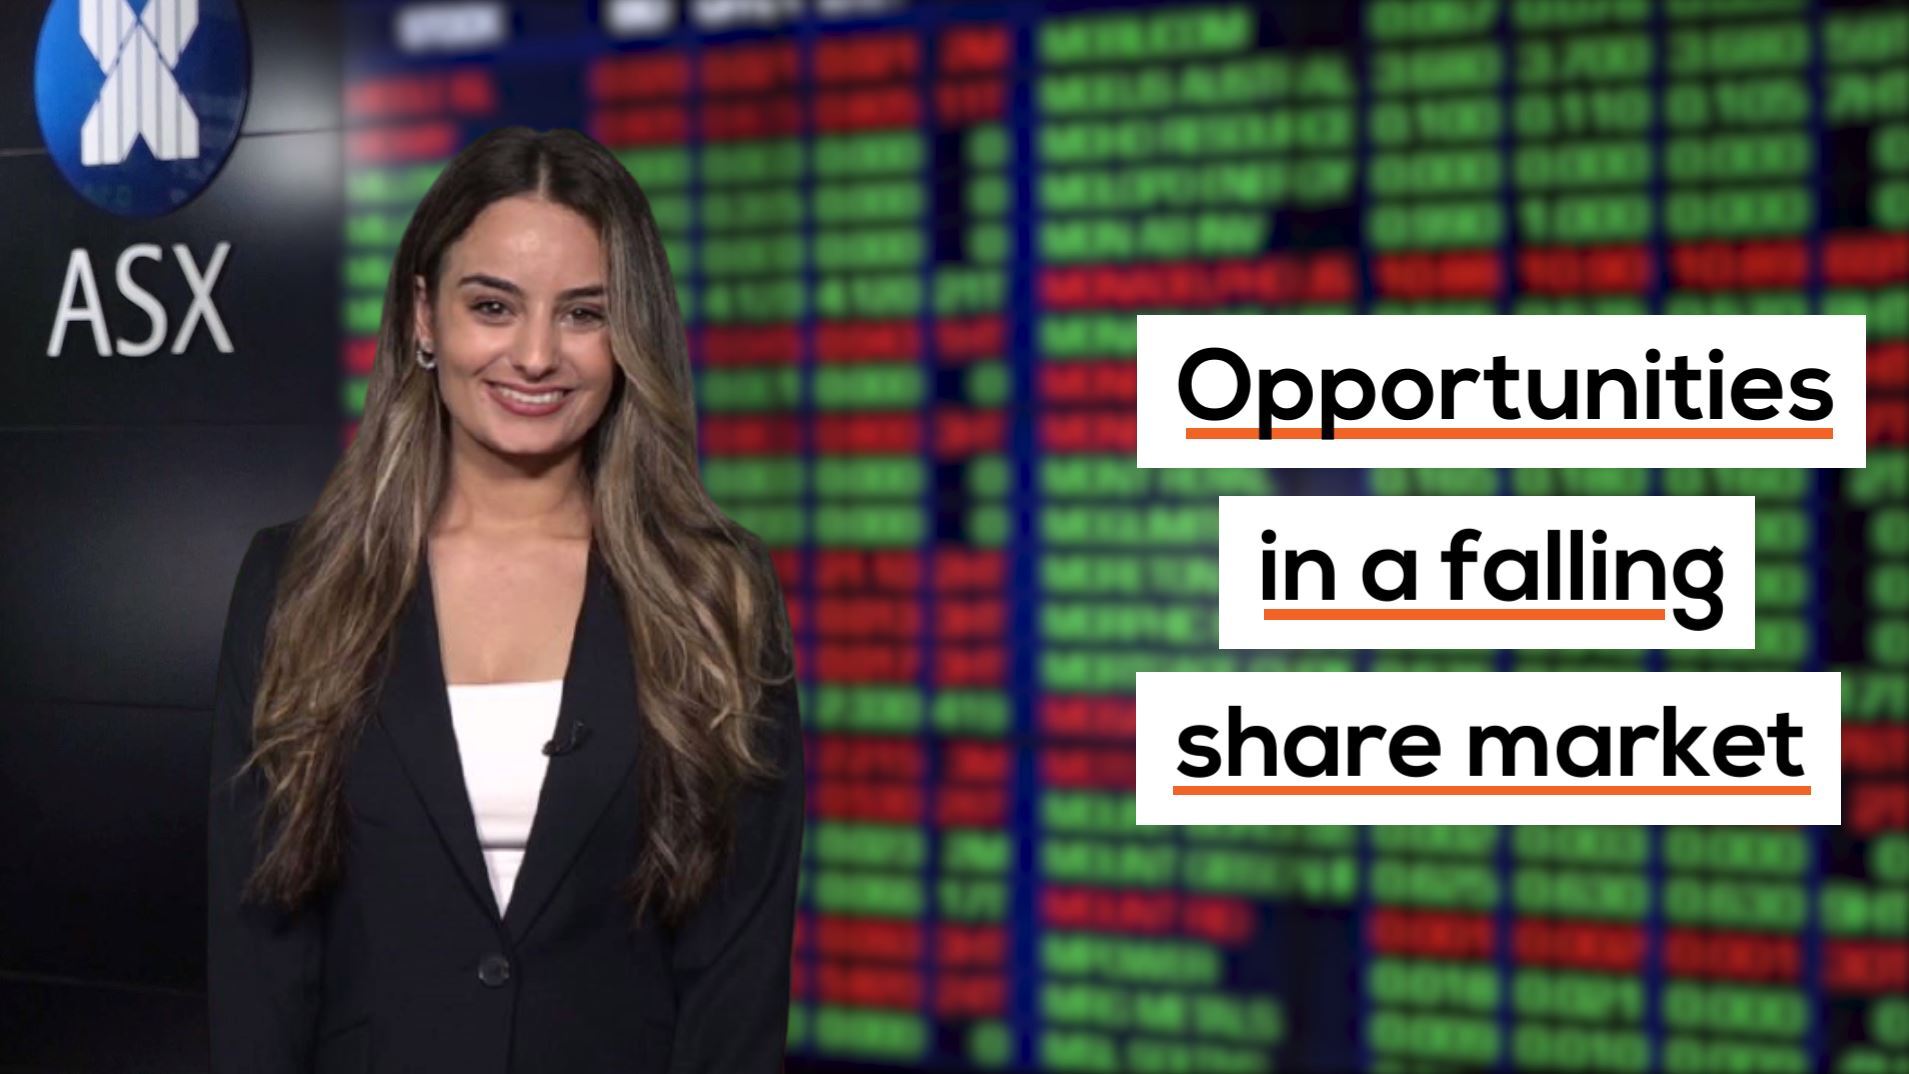 Opportunities in a falling share market